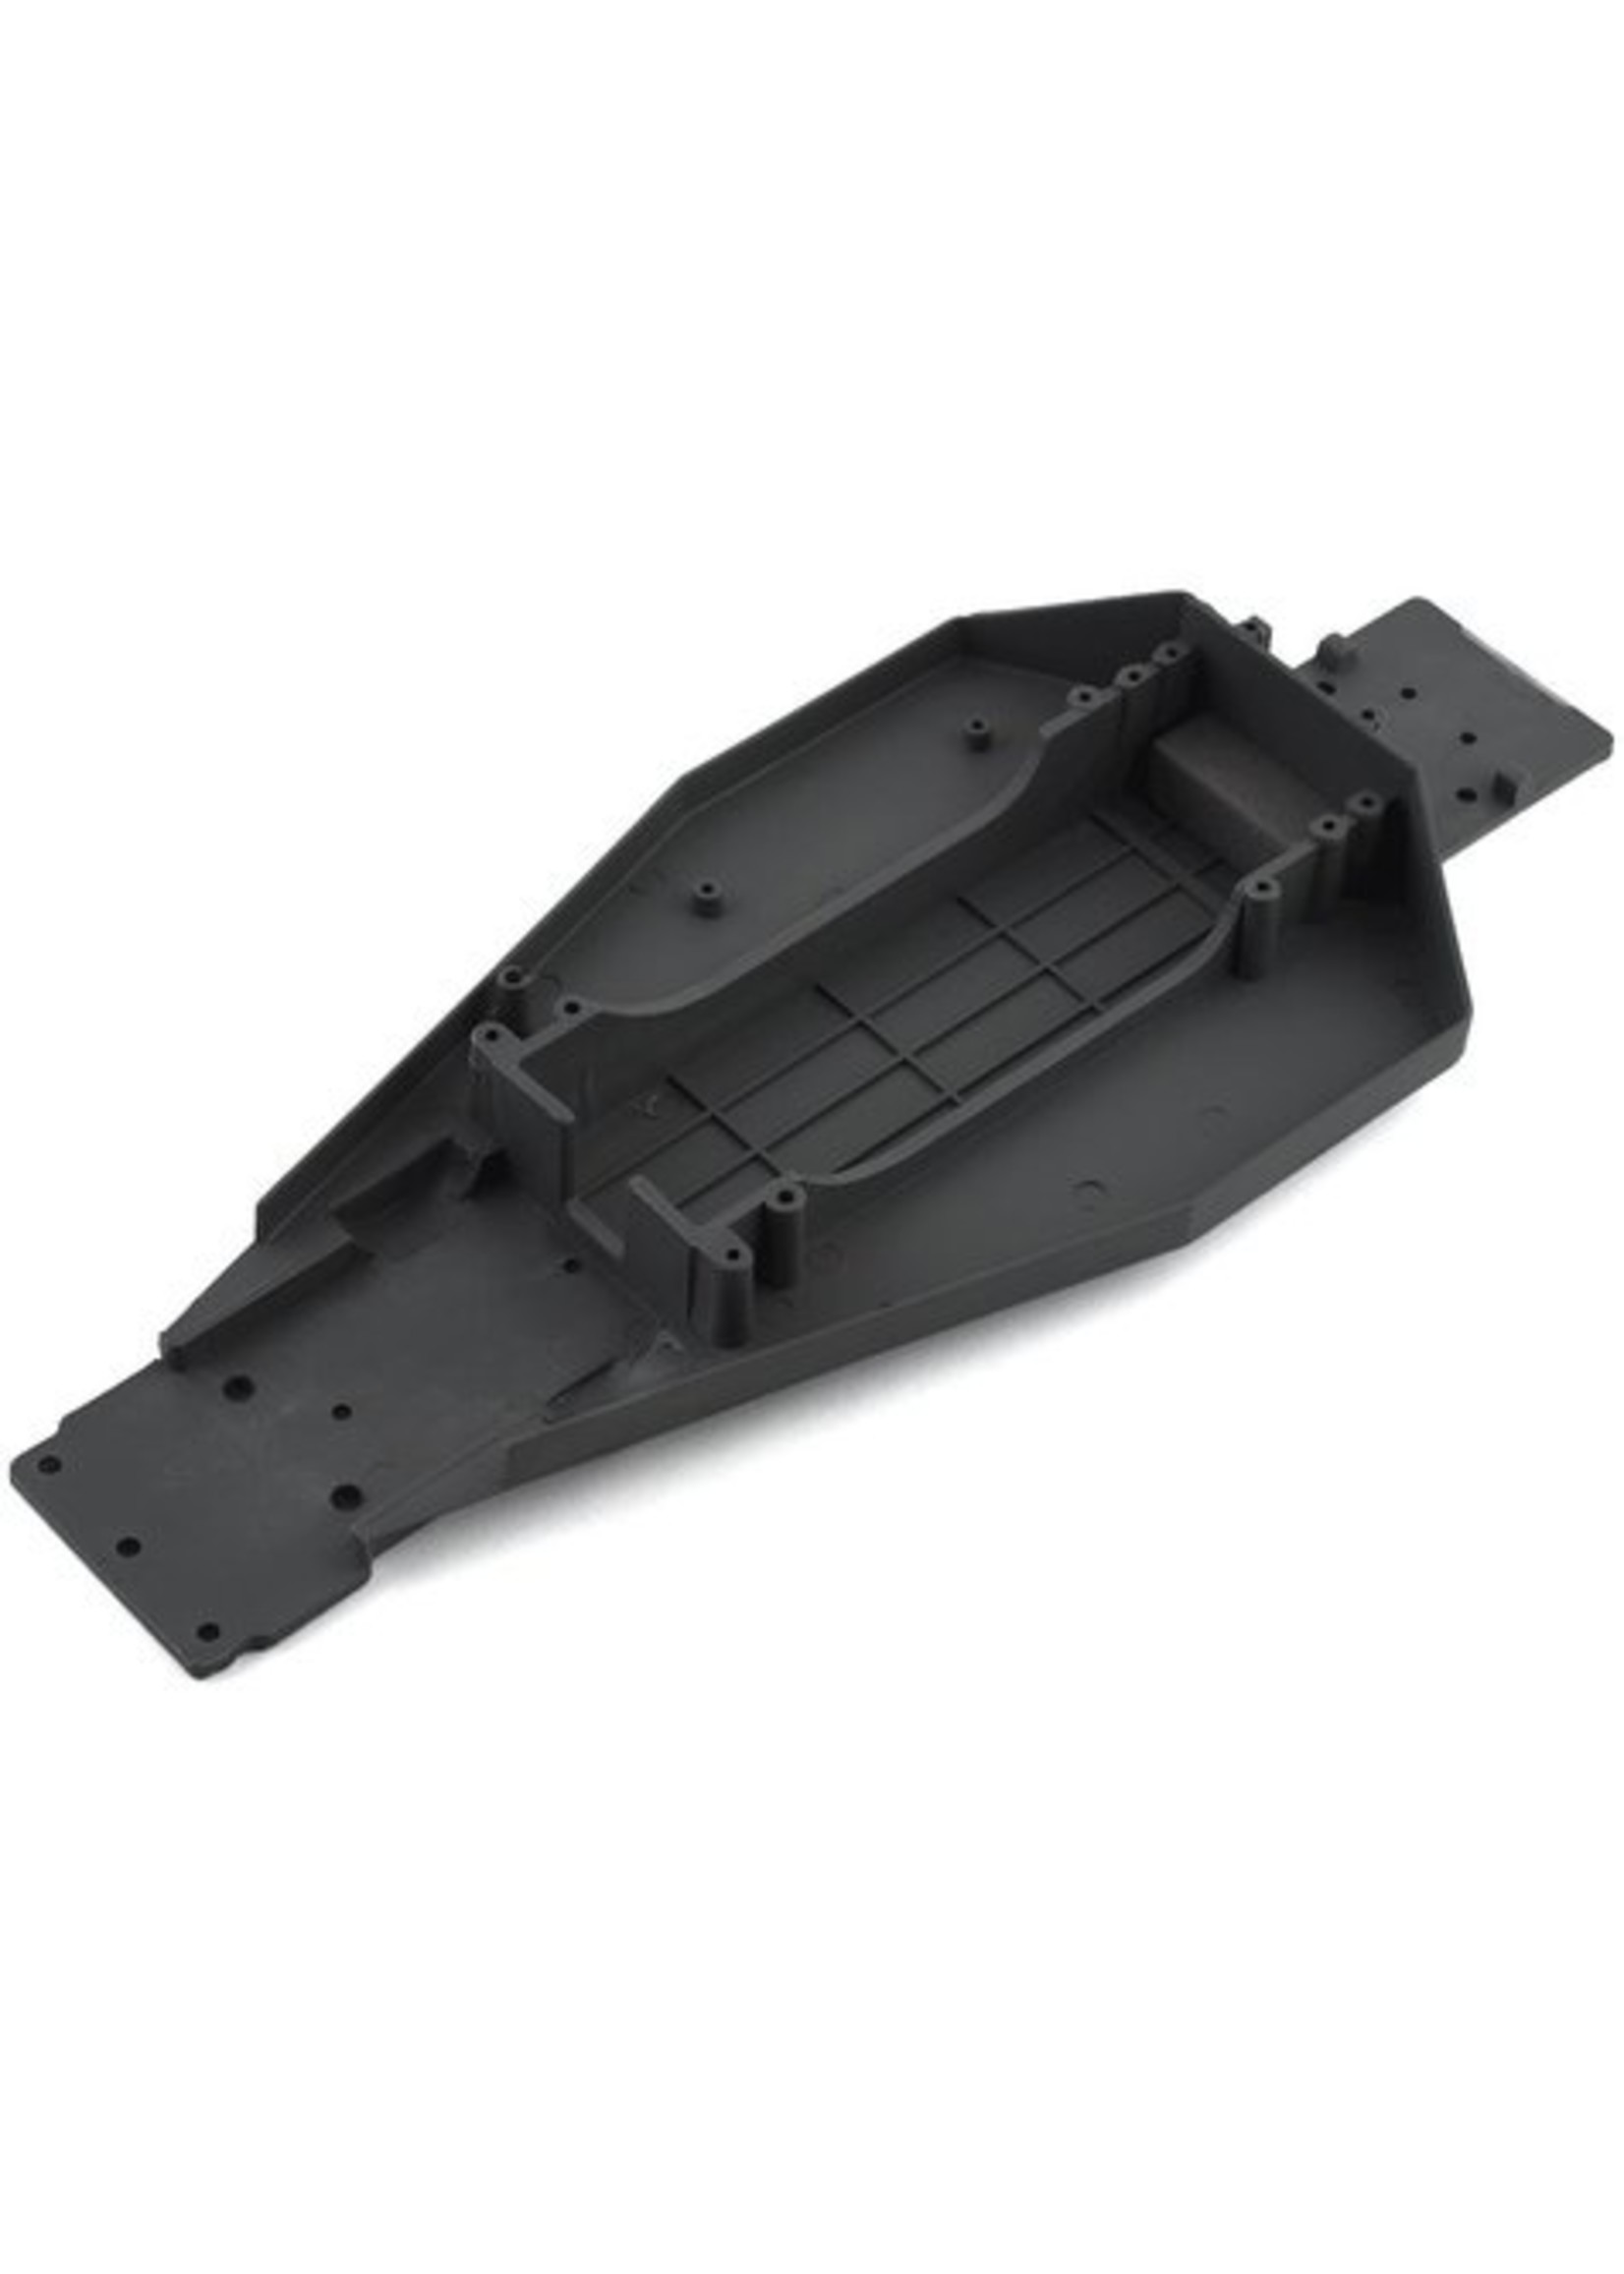 Traxxas TRA3722R Traxxas Lower chassis (gray) (166mm long battery compartment) (fits both flat and hump style battery packs) (use only with #3725R ESC mounting plate)